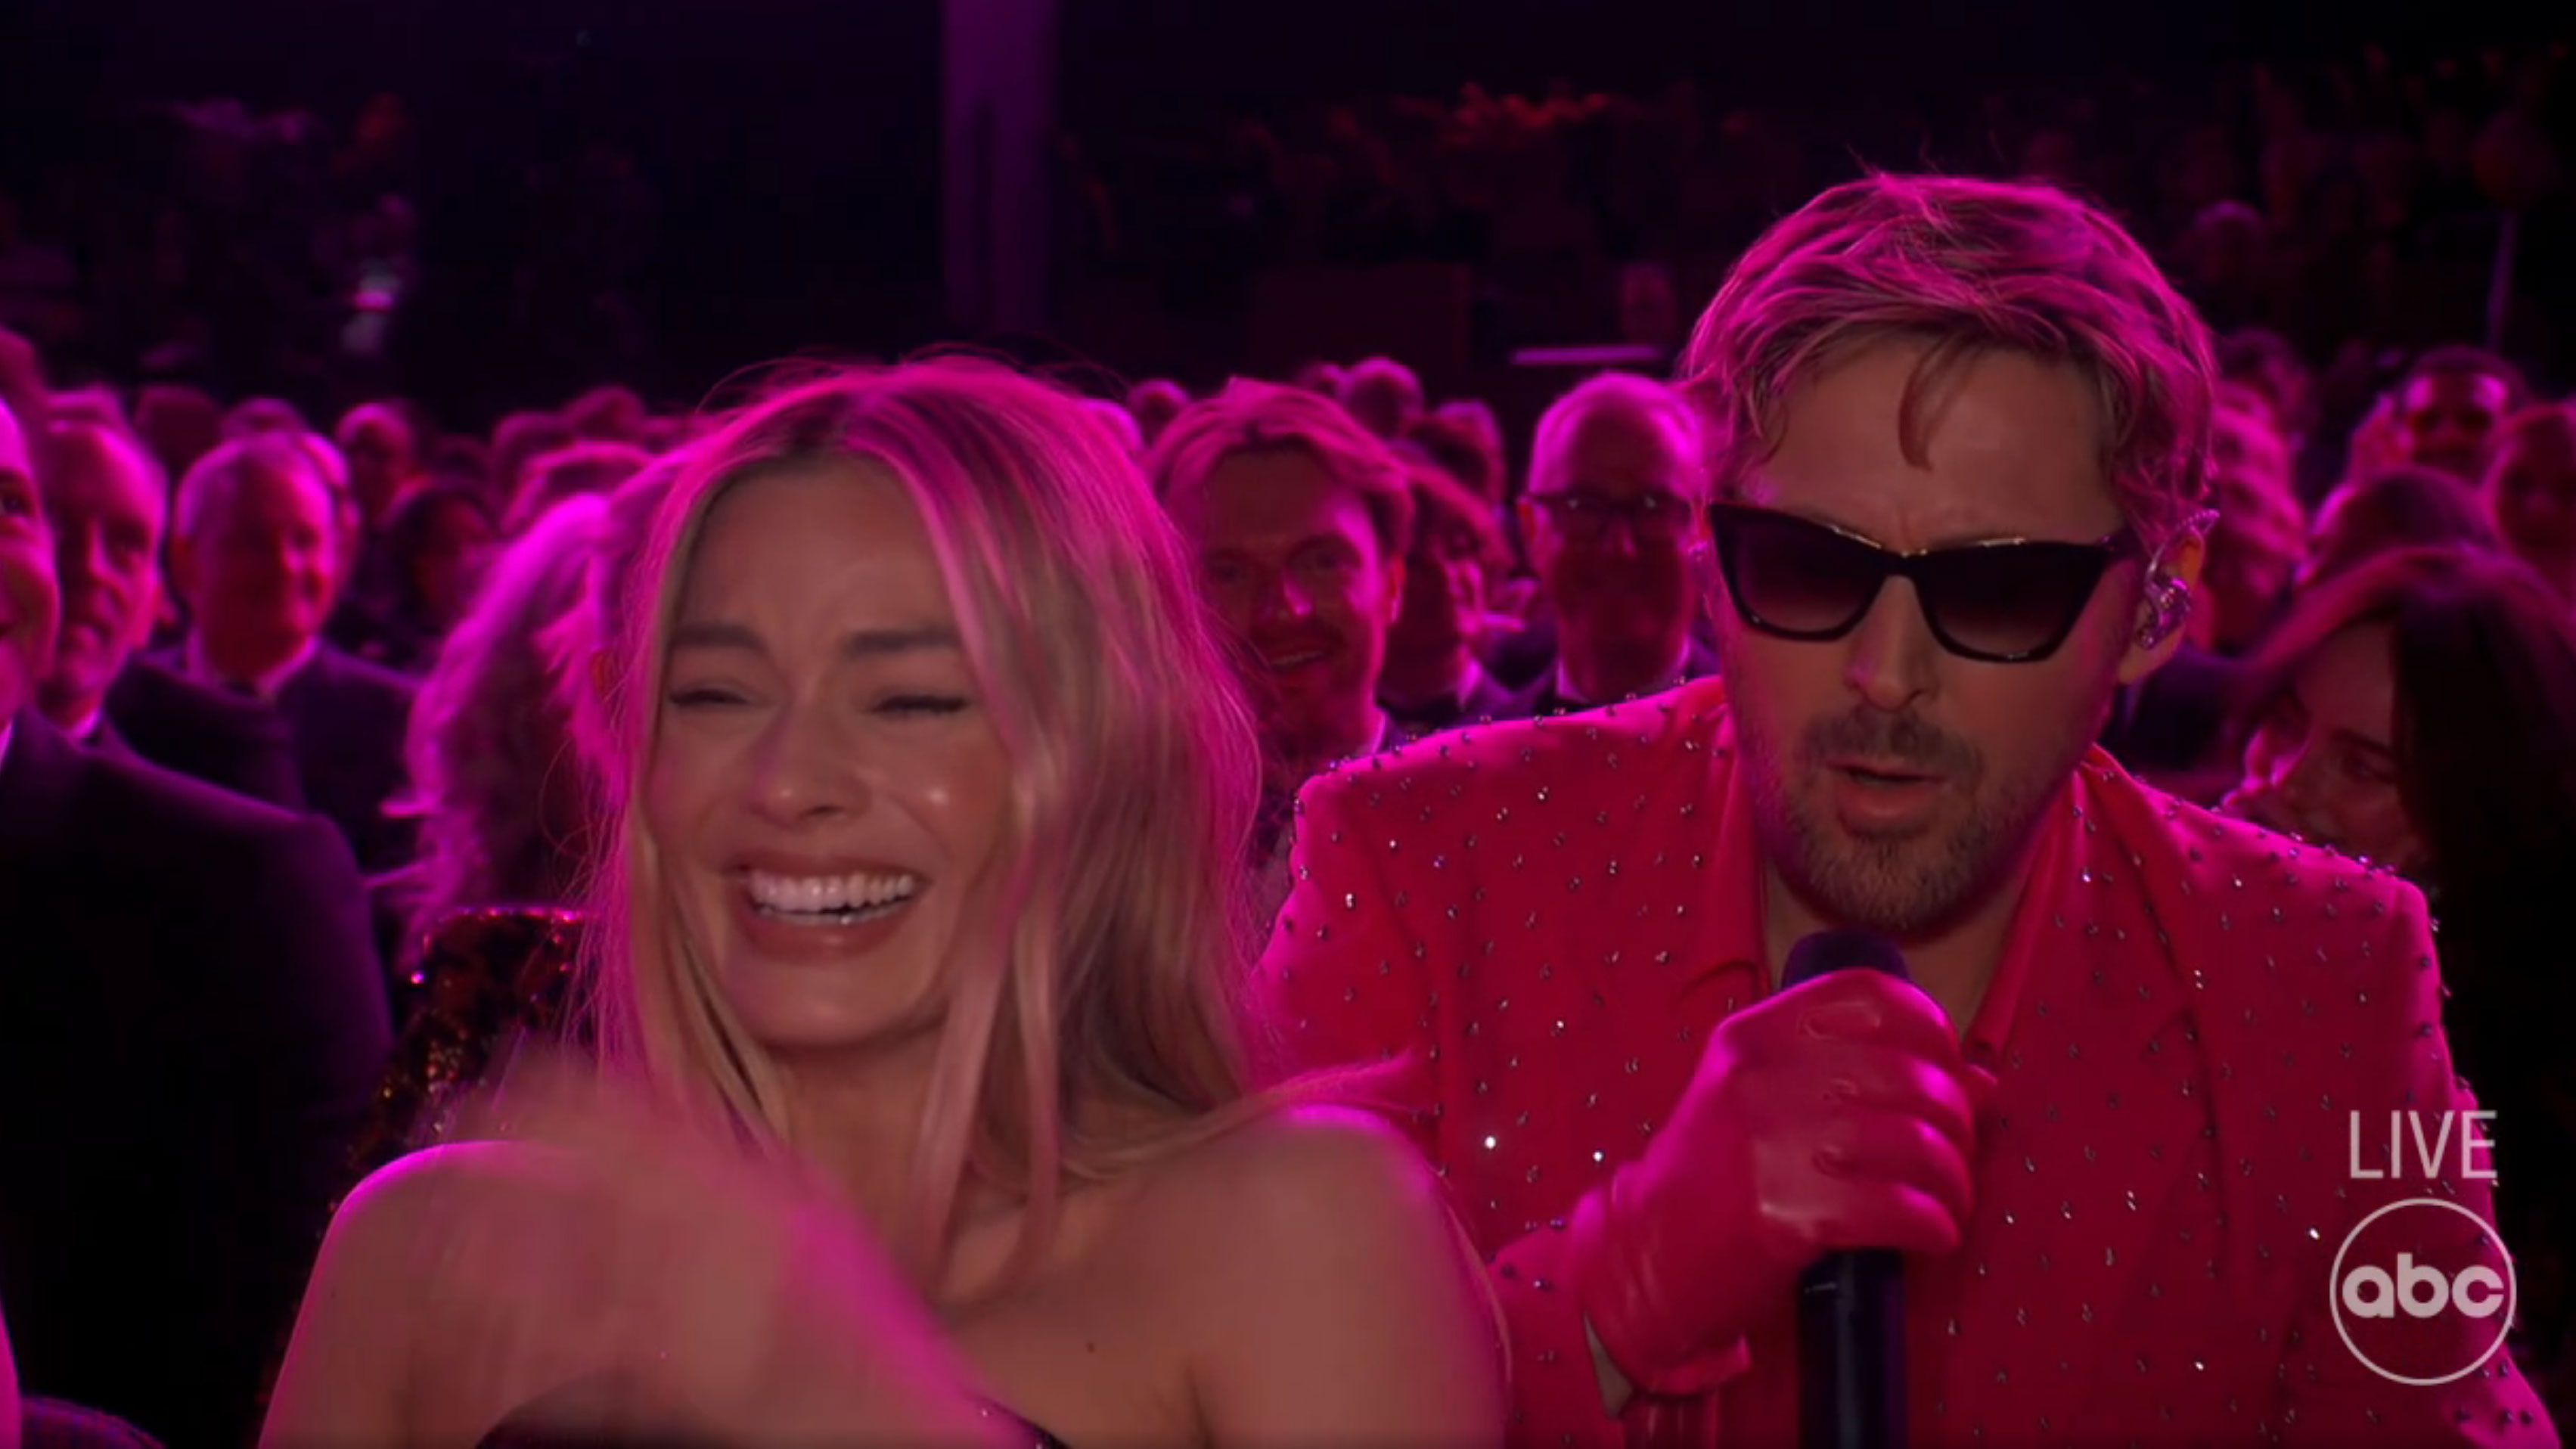 At the beginning of the song, Ryan had Margot bursting out in laughter